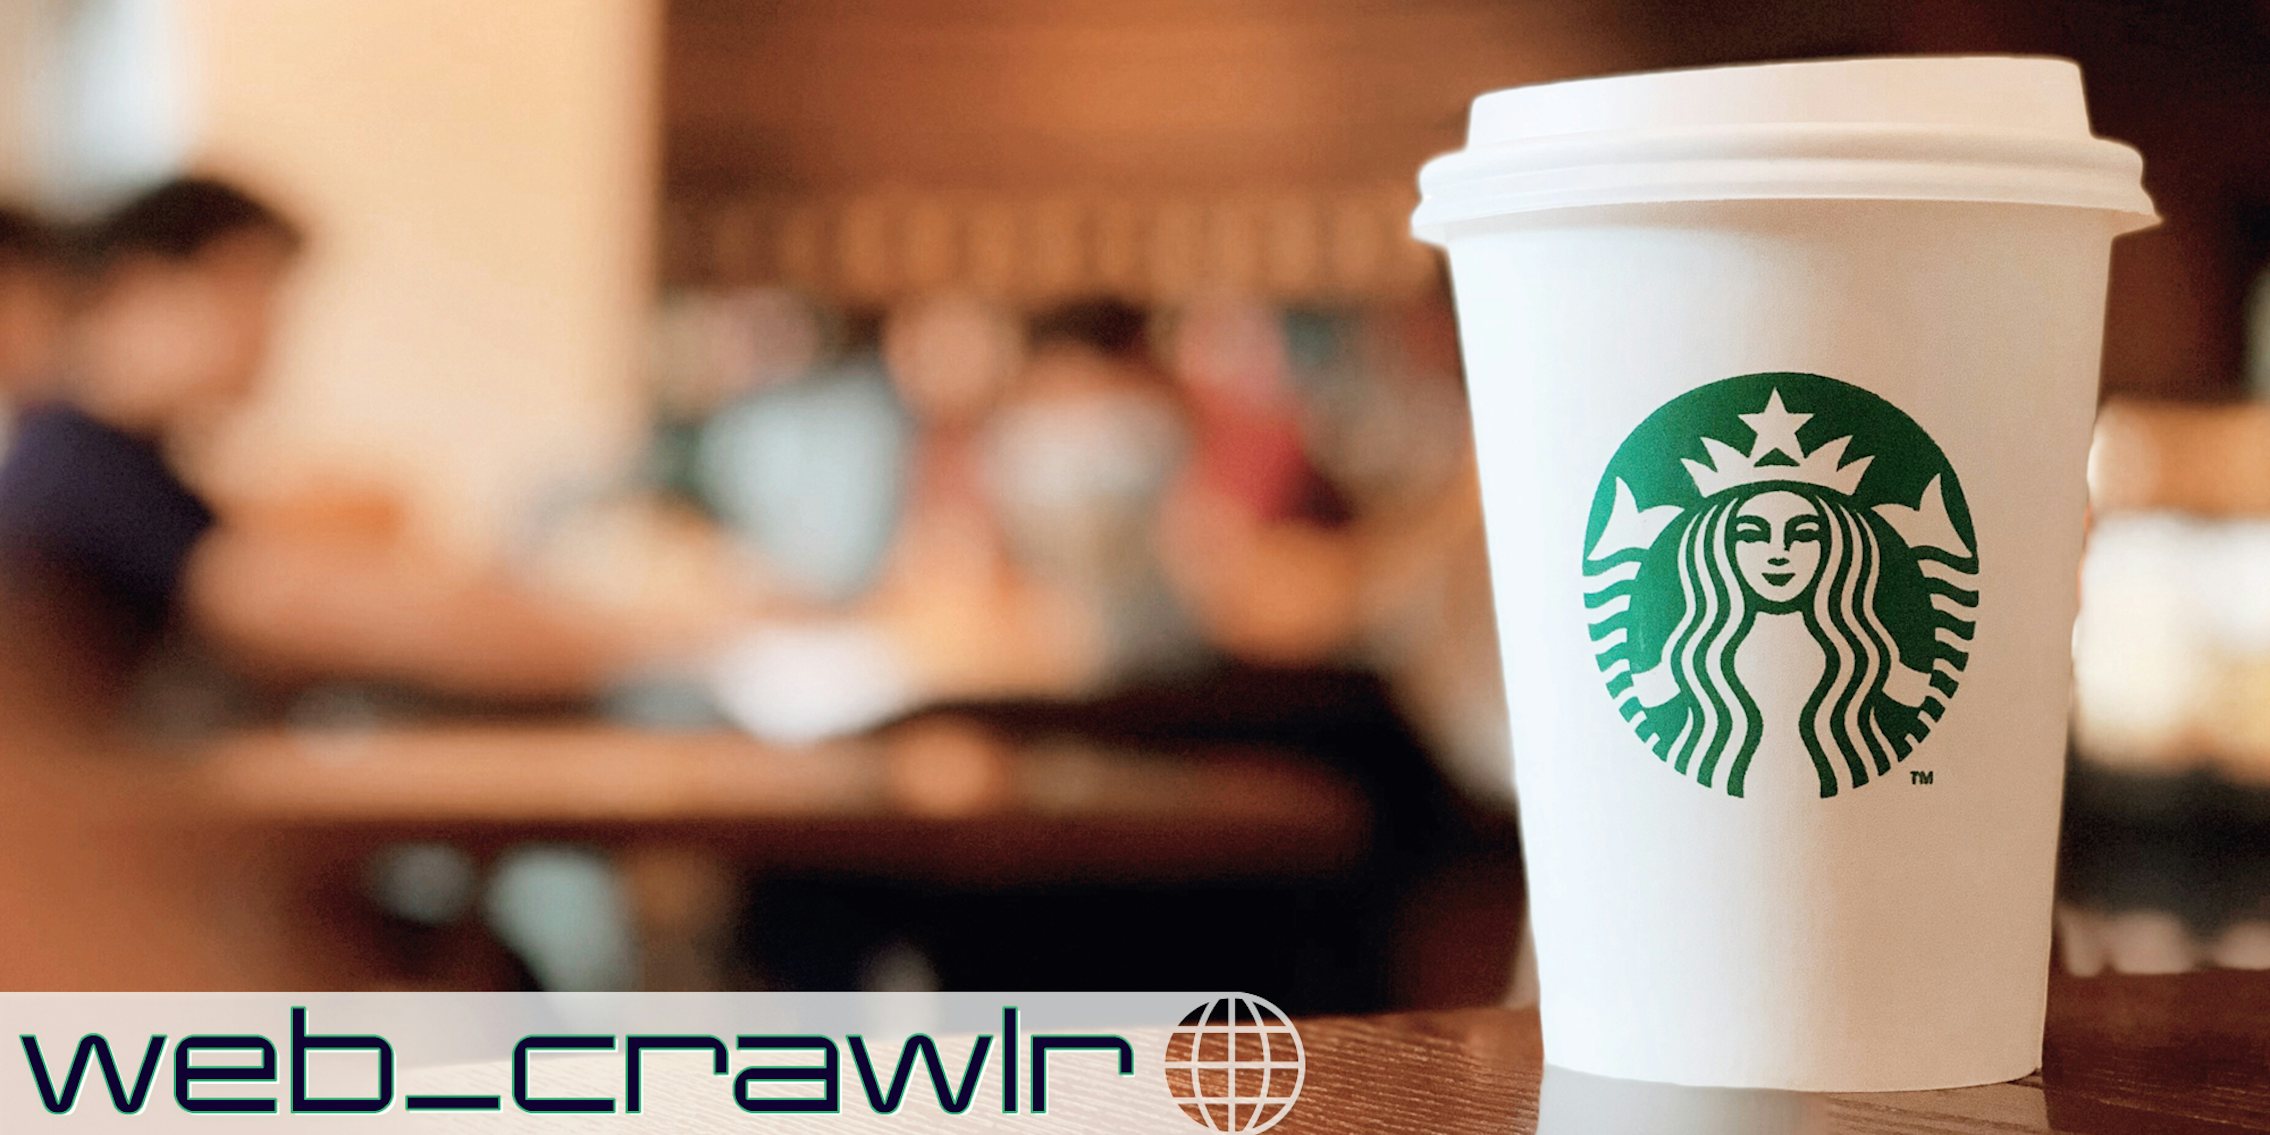 A Starbucks cup. The Daily Dot newsletter web_crawlr logo is in the bottom left corner.